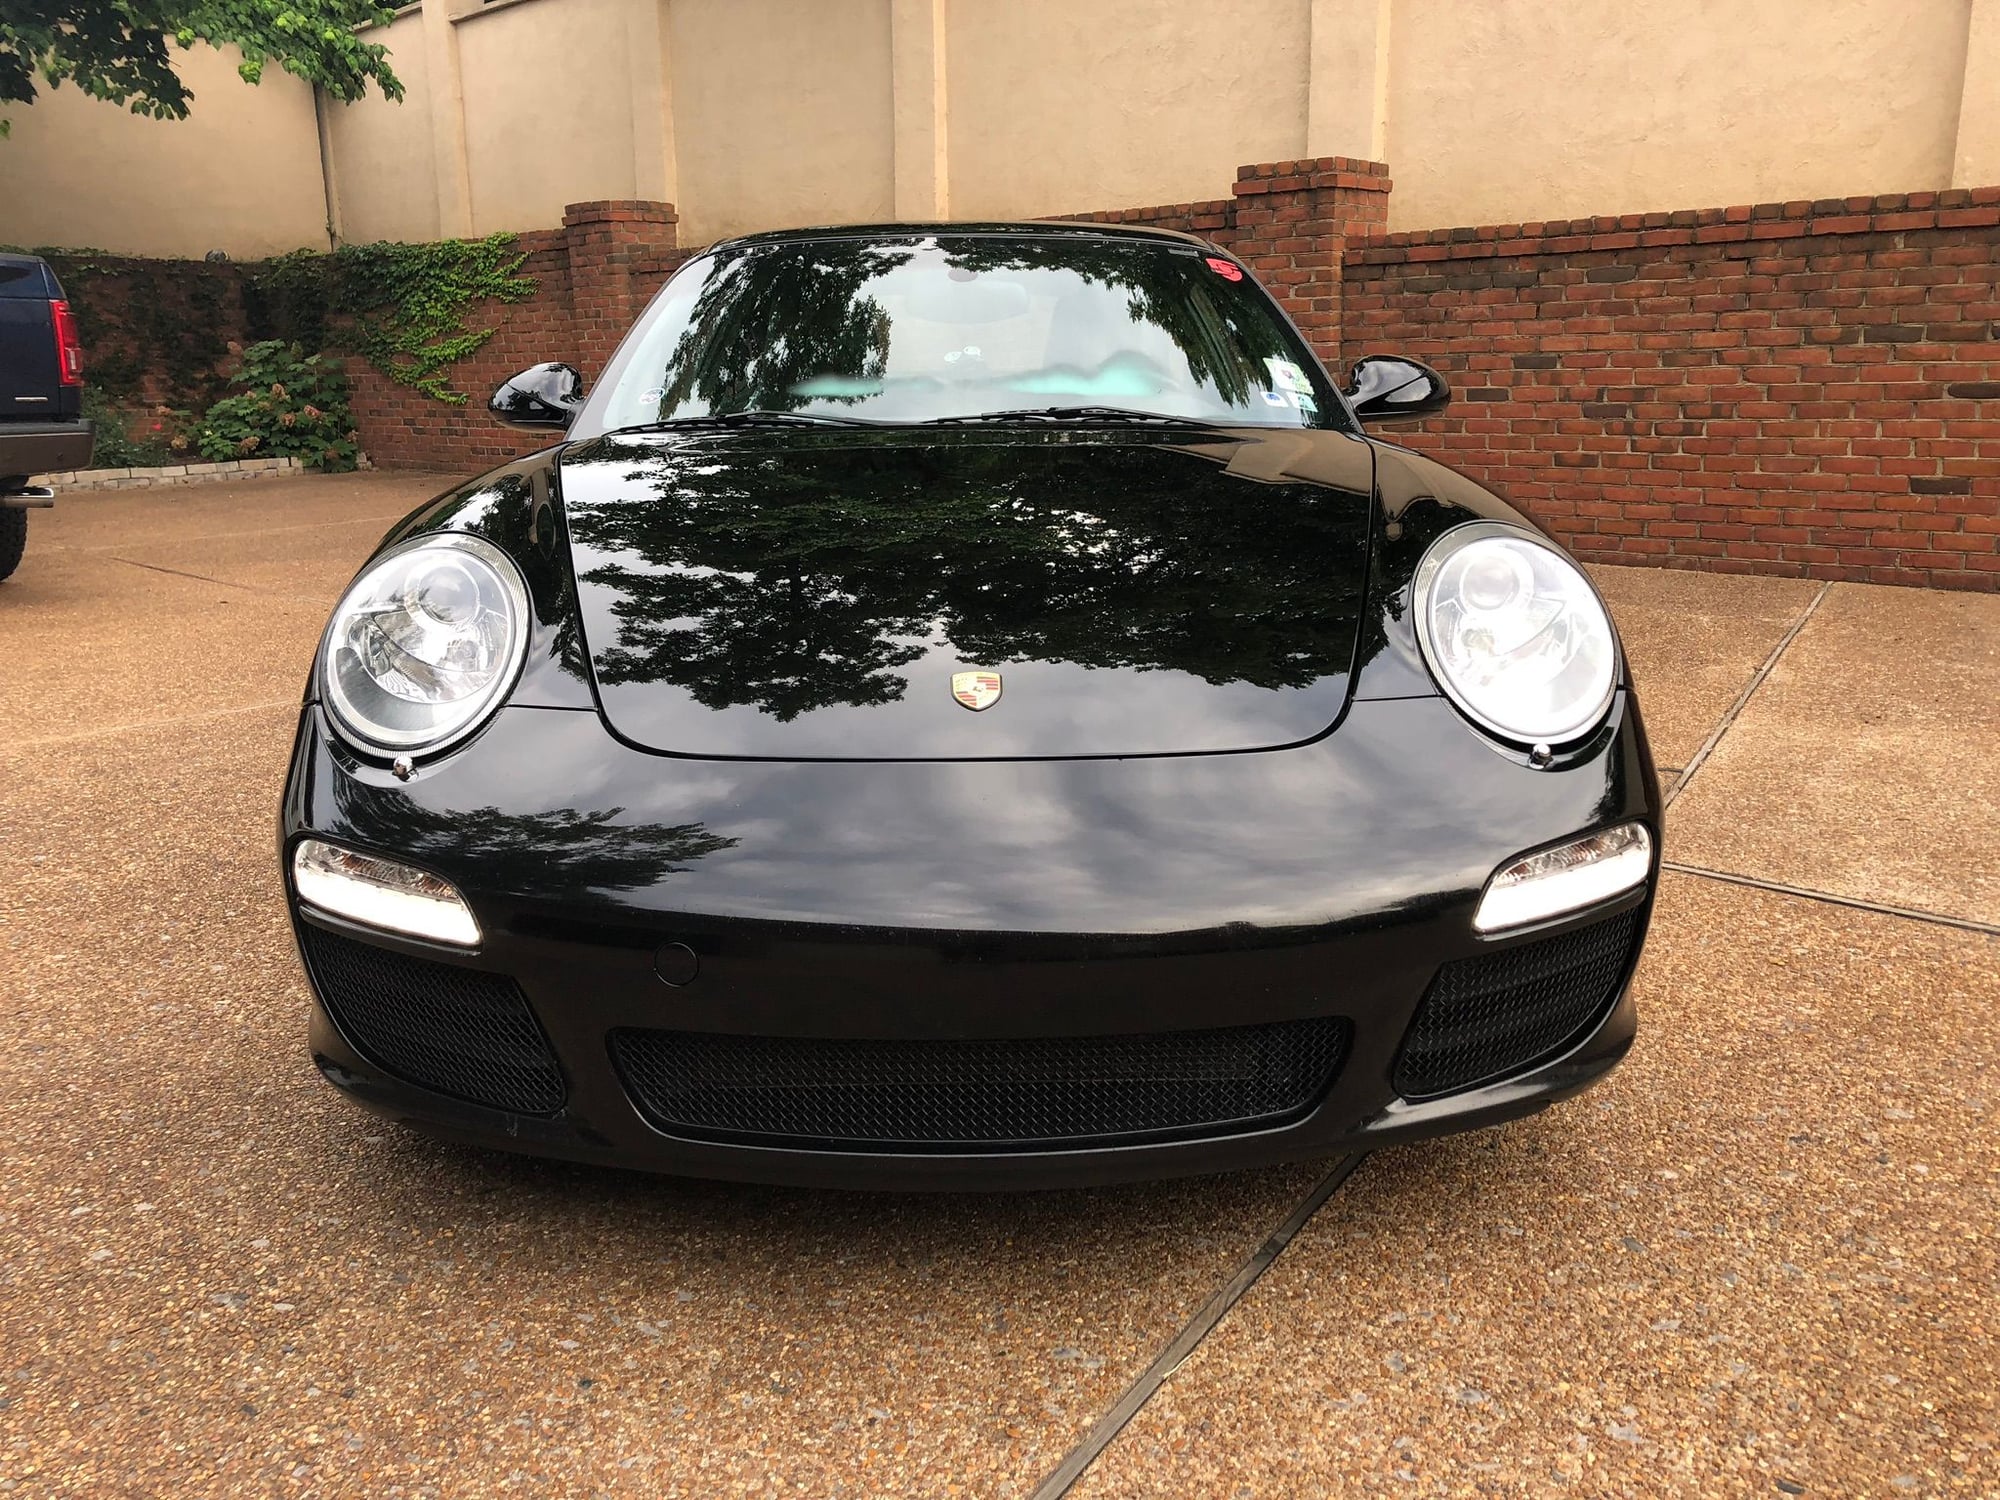 2011 Porsche 911 - 2011 997.2S - Fidelity Platinum Until 04/14/2020 OR 78,500 Miles - Used - VIN WP0AB2A95BS721557 - 46,000 Miles - 6 cyl - 2WD - Automatic - Coupe - Black - Memphis, TN 38120, United States